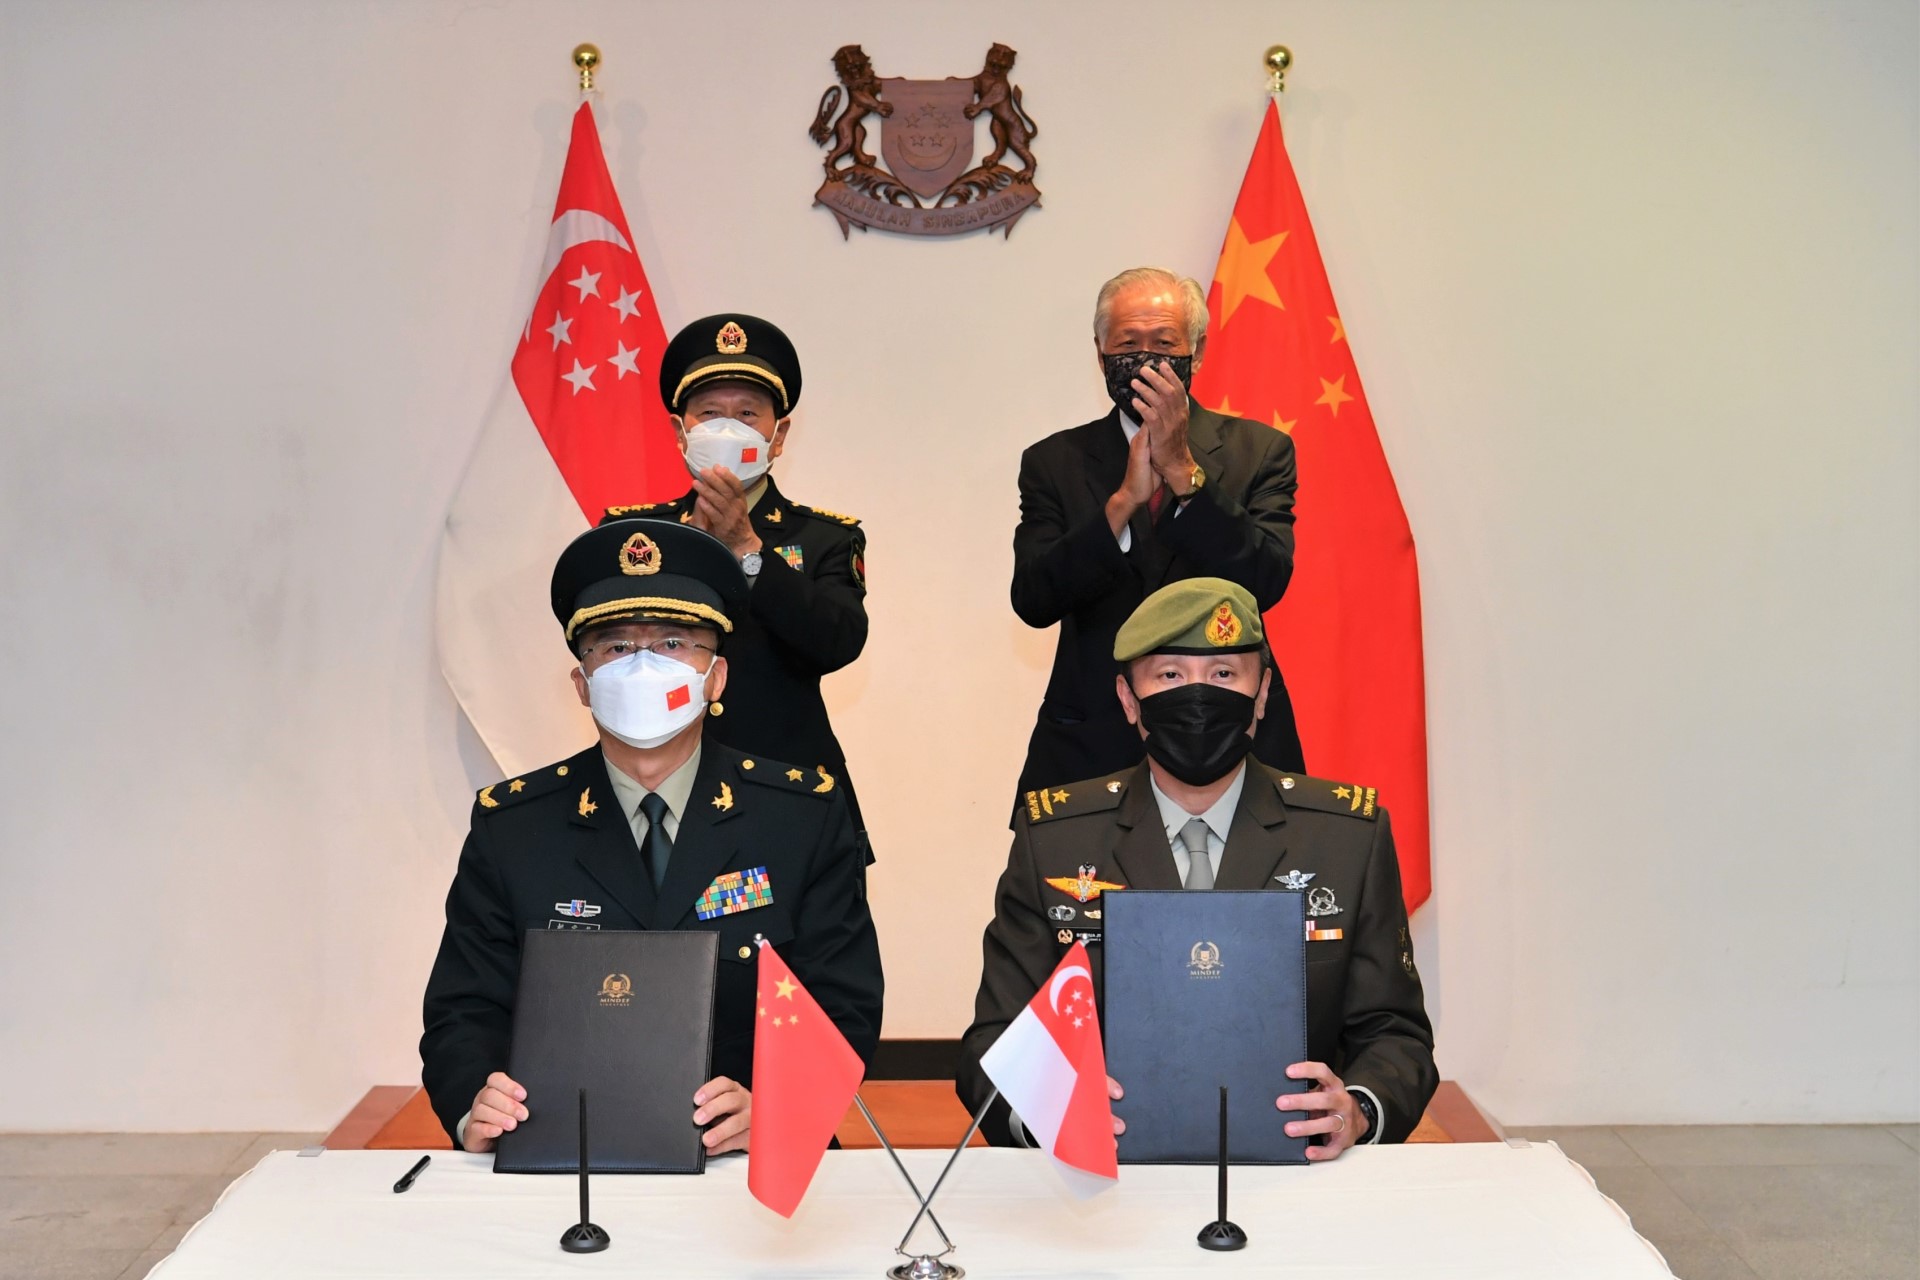 Dr Ng (standing on the right) and GEN Wei (standing on the left) witnessing the signing of the MOU for Academic Cooperation between the Singapore Armed Forces Training Institute (SAFTI) Military Institute and the Academy of Military Sciences...